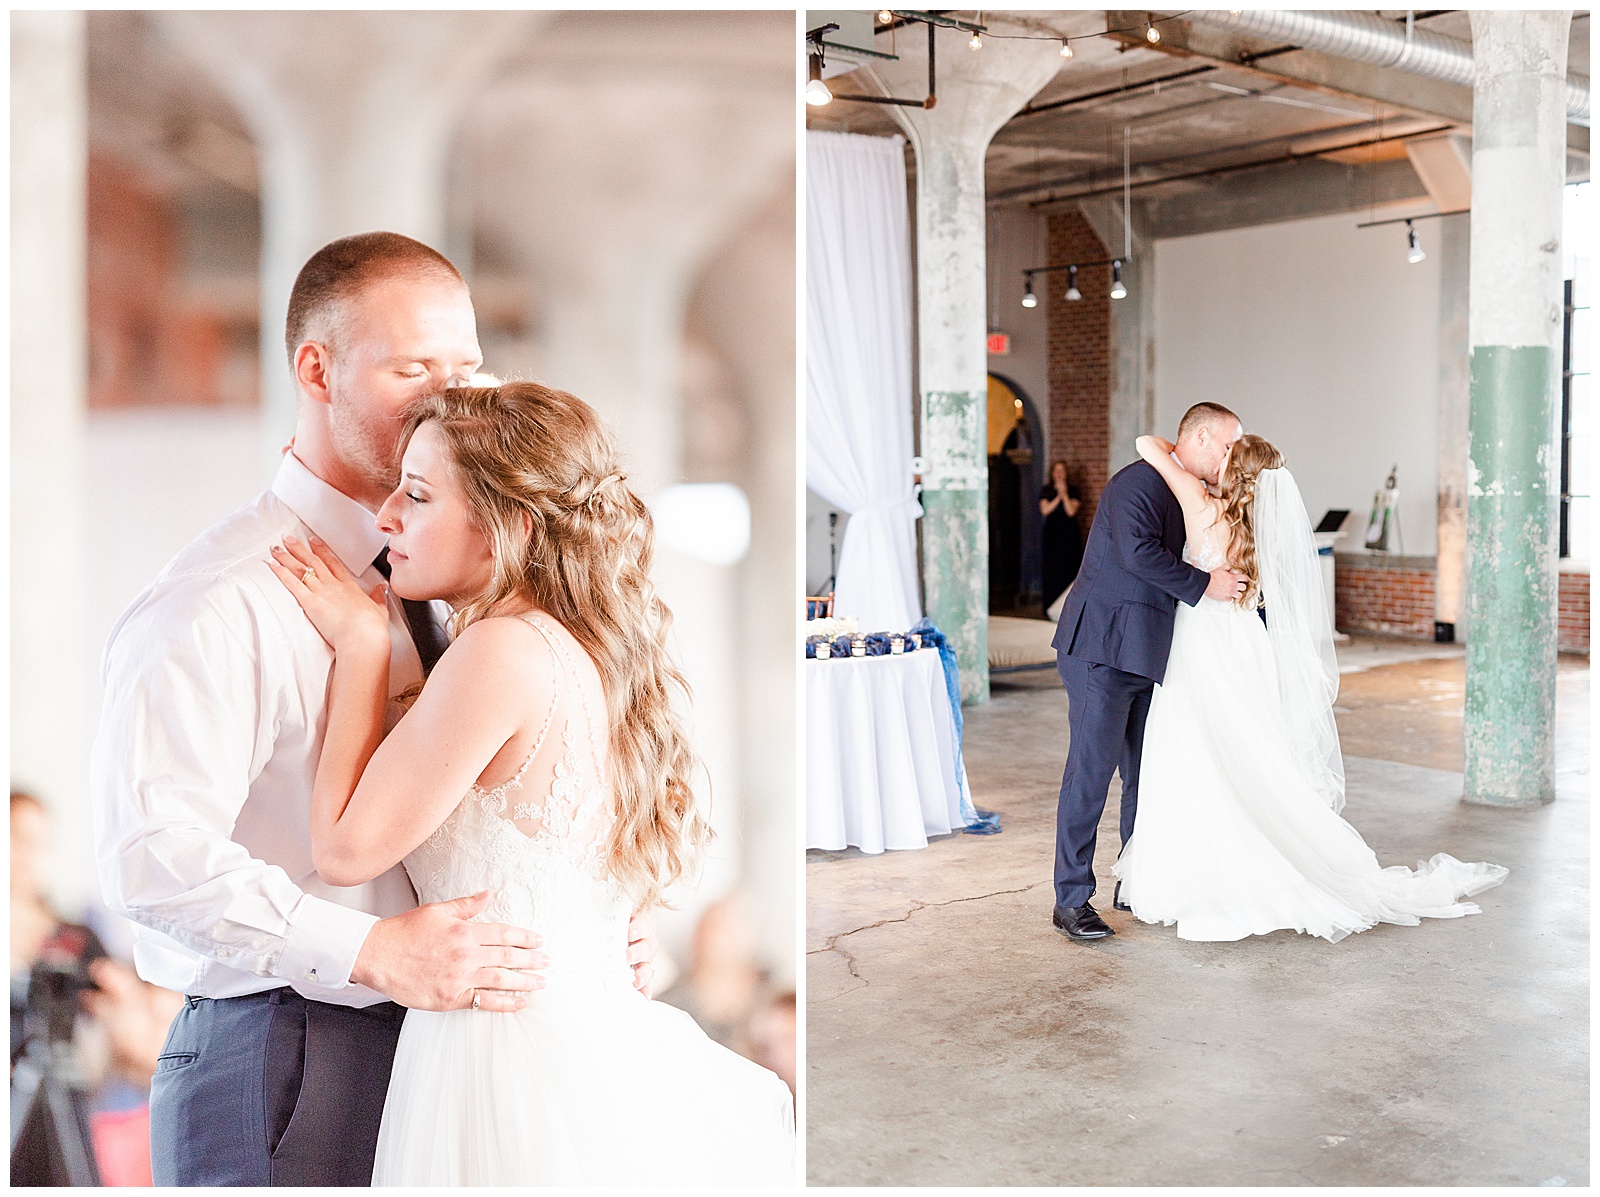 Bride and Groom Emotional First Dance at Rustic Airy Indoor Wedding Venue with fairy lights in Elegant Modern Summer Wedding in Charlotte, NC | check out the full wedding at KevynDixonPhoto.com